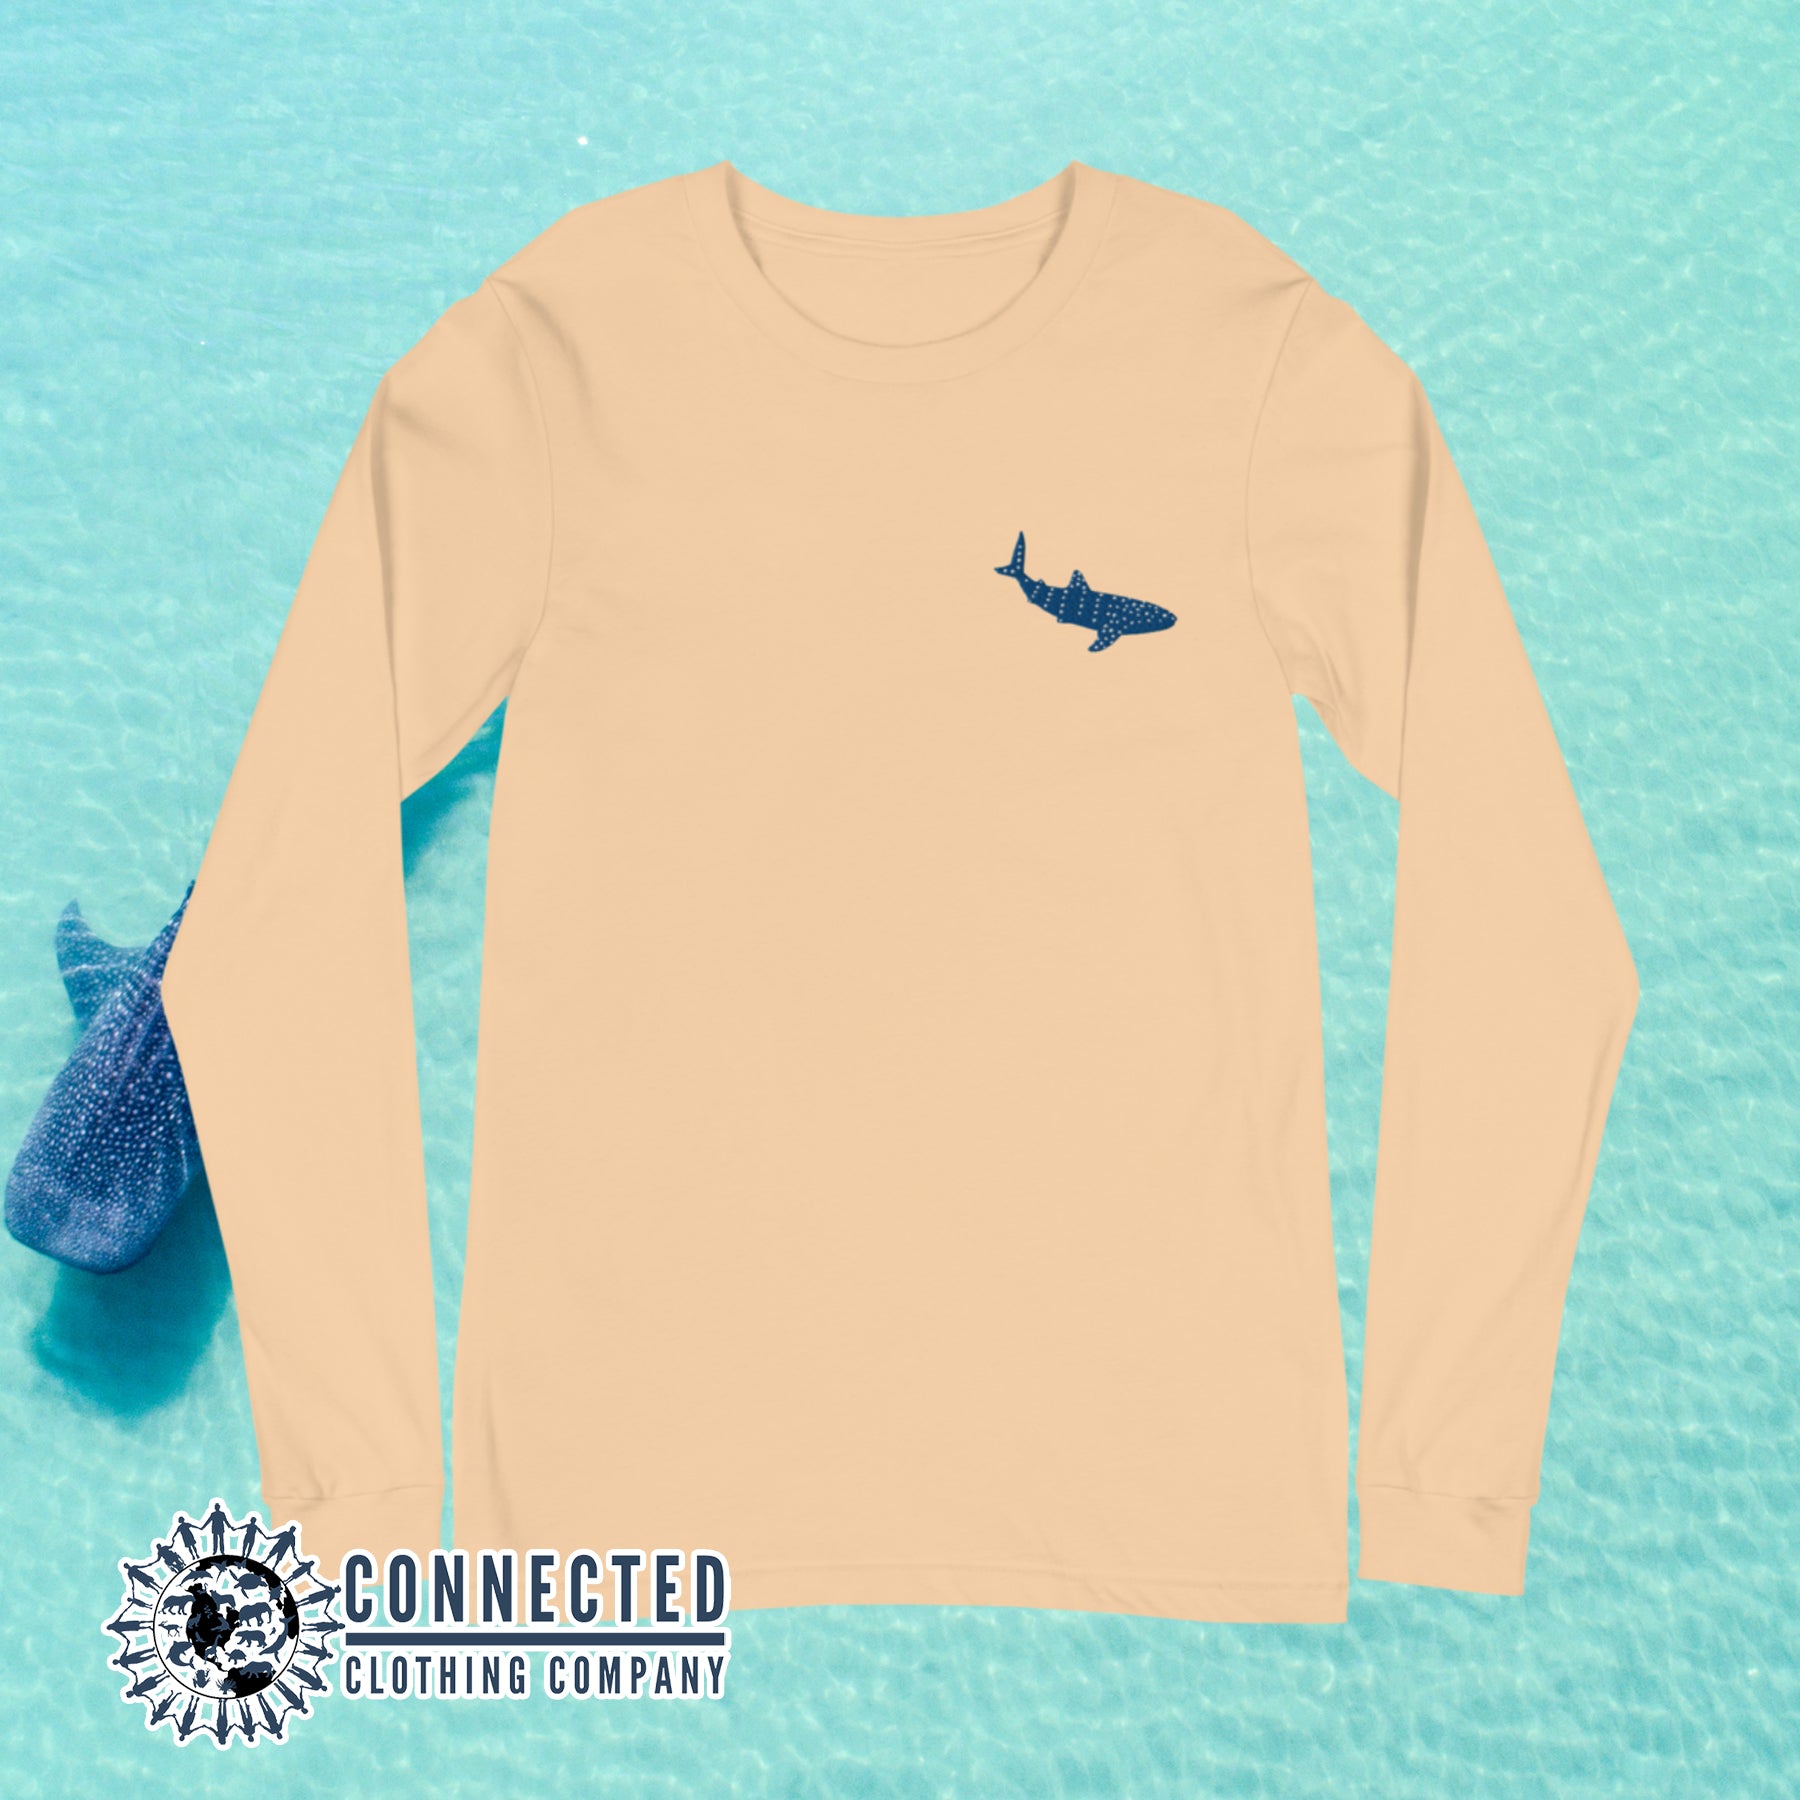 Sand Dune Embroidered Whale Shark Long-Sleeve Shirt - Connected Clothing Company - Ethically and Sustainably Made - 10% of profits donated to shark conservation and ocean conservation